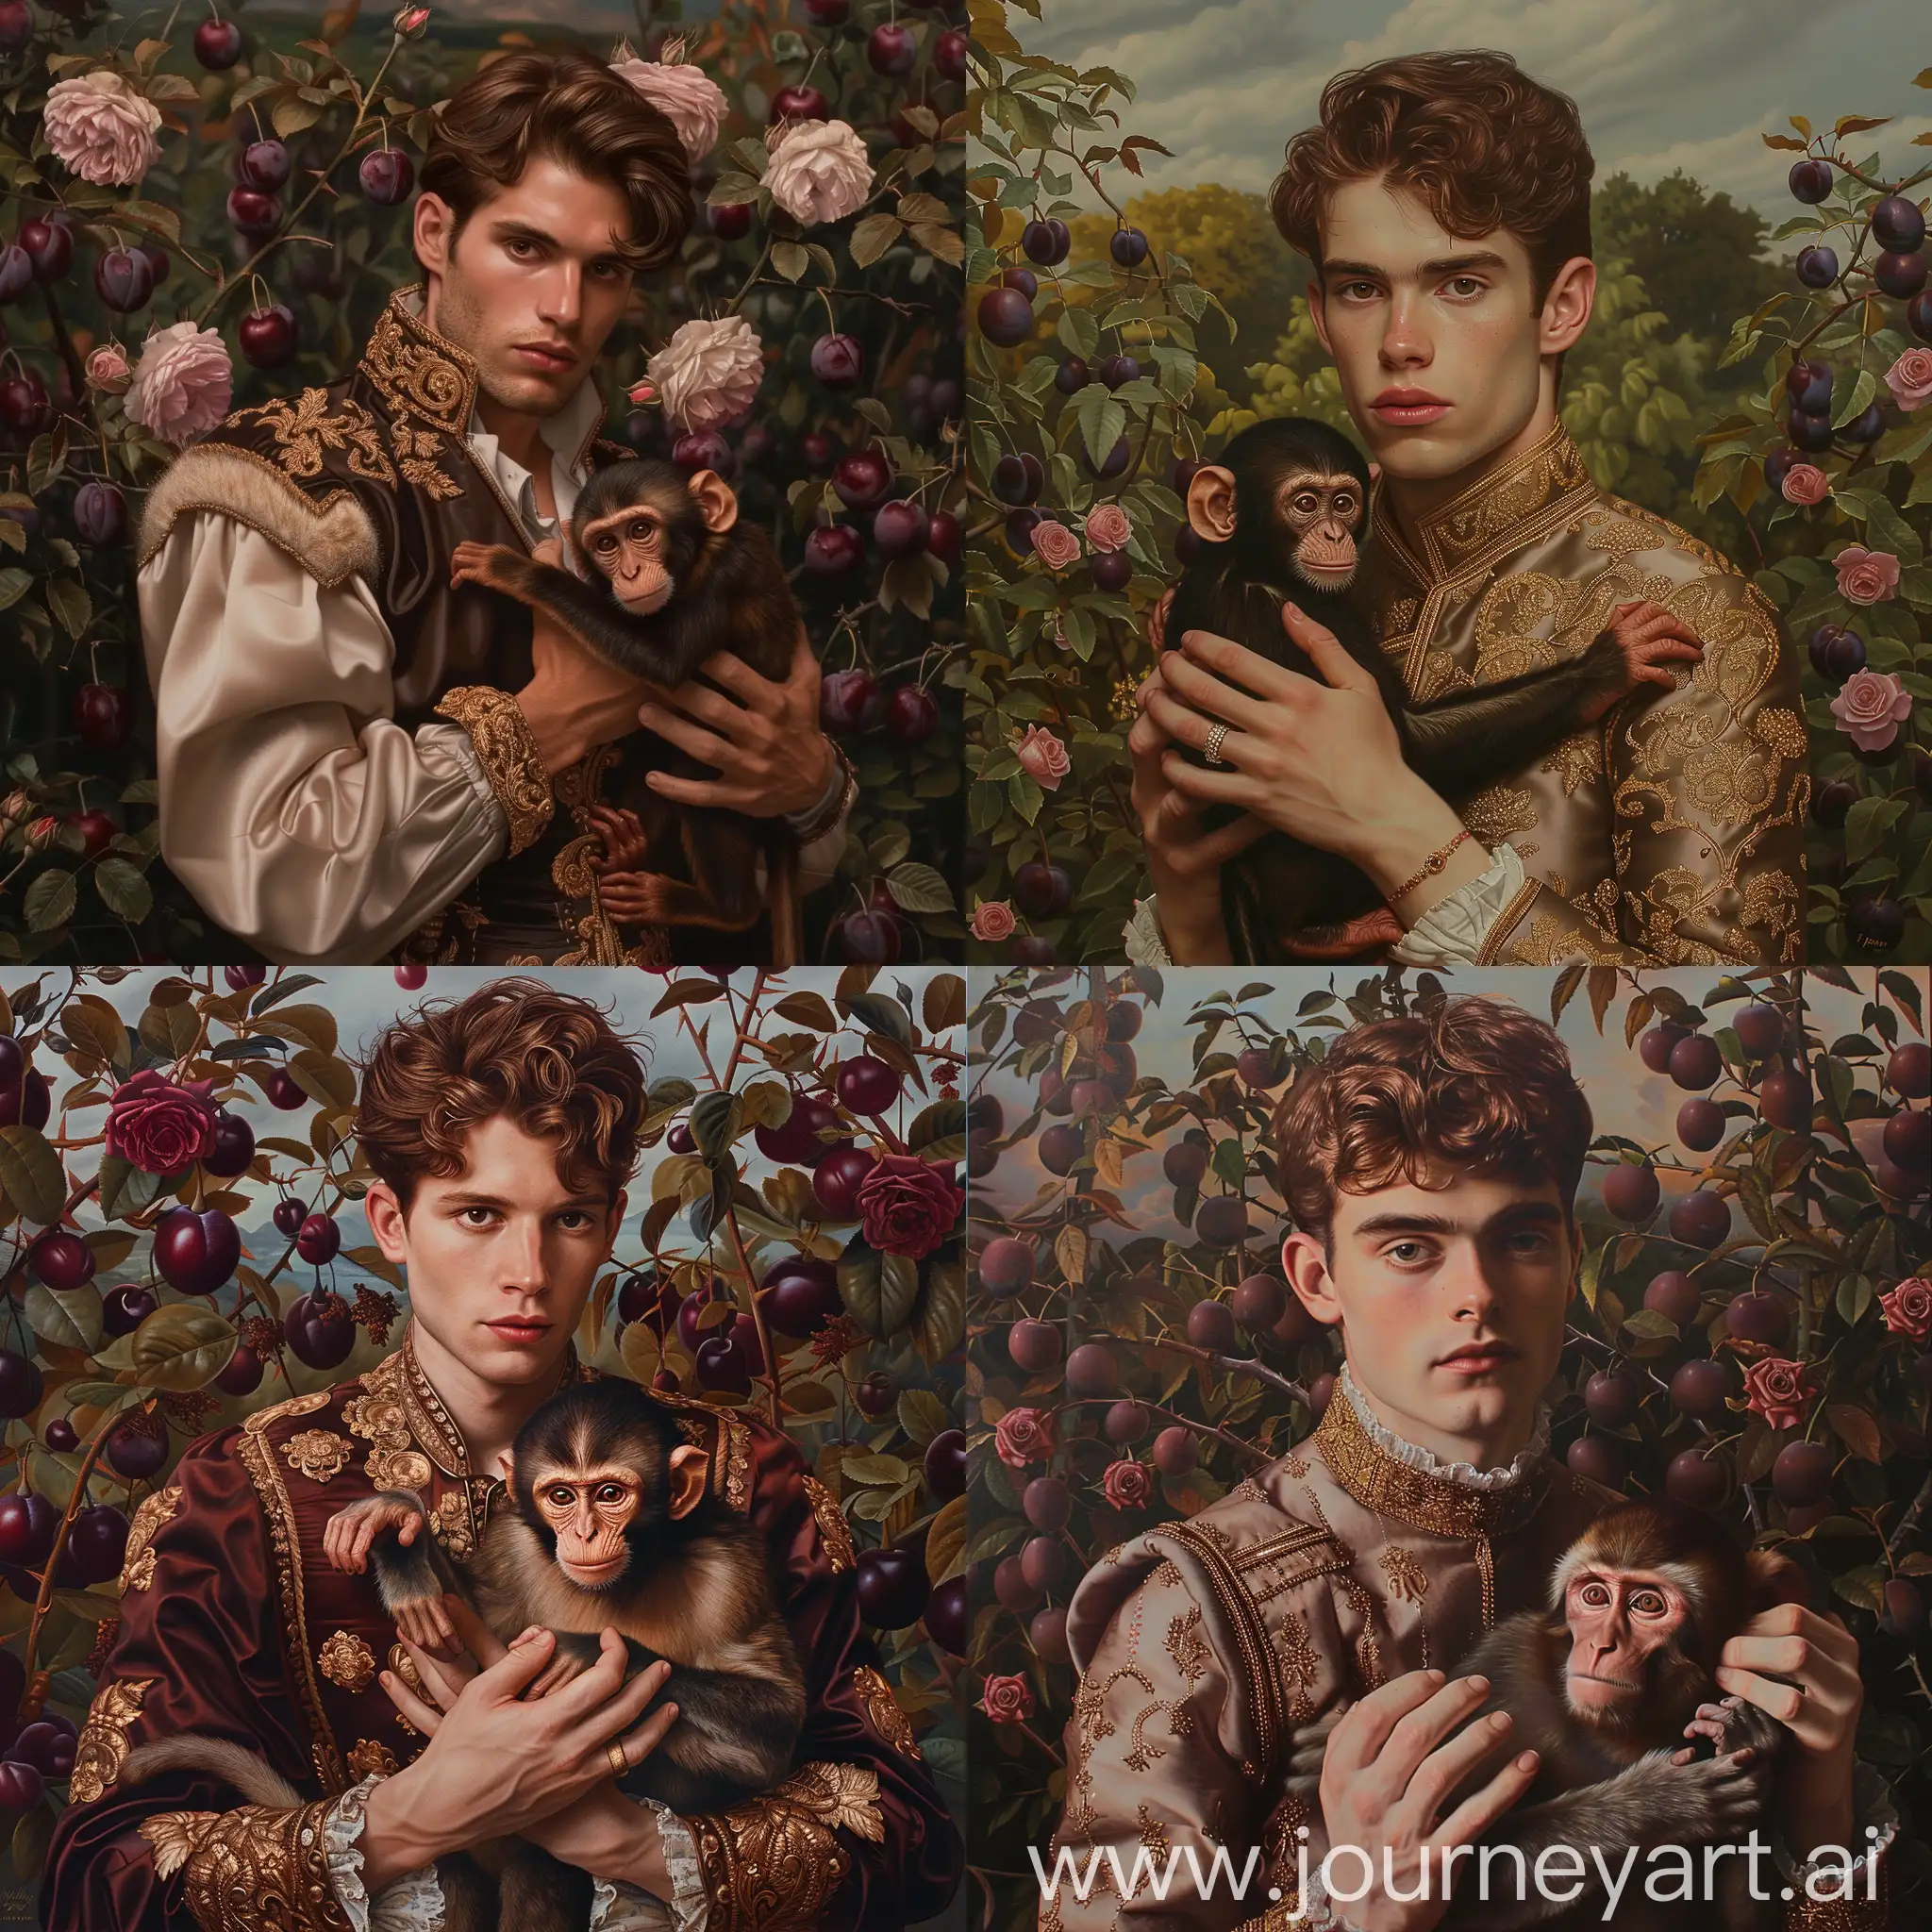 Baroque-Style-Portrait-Handsome-Man-with-Monkey-in-Lush-Garden-Setting